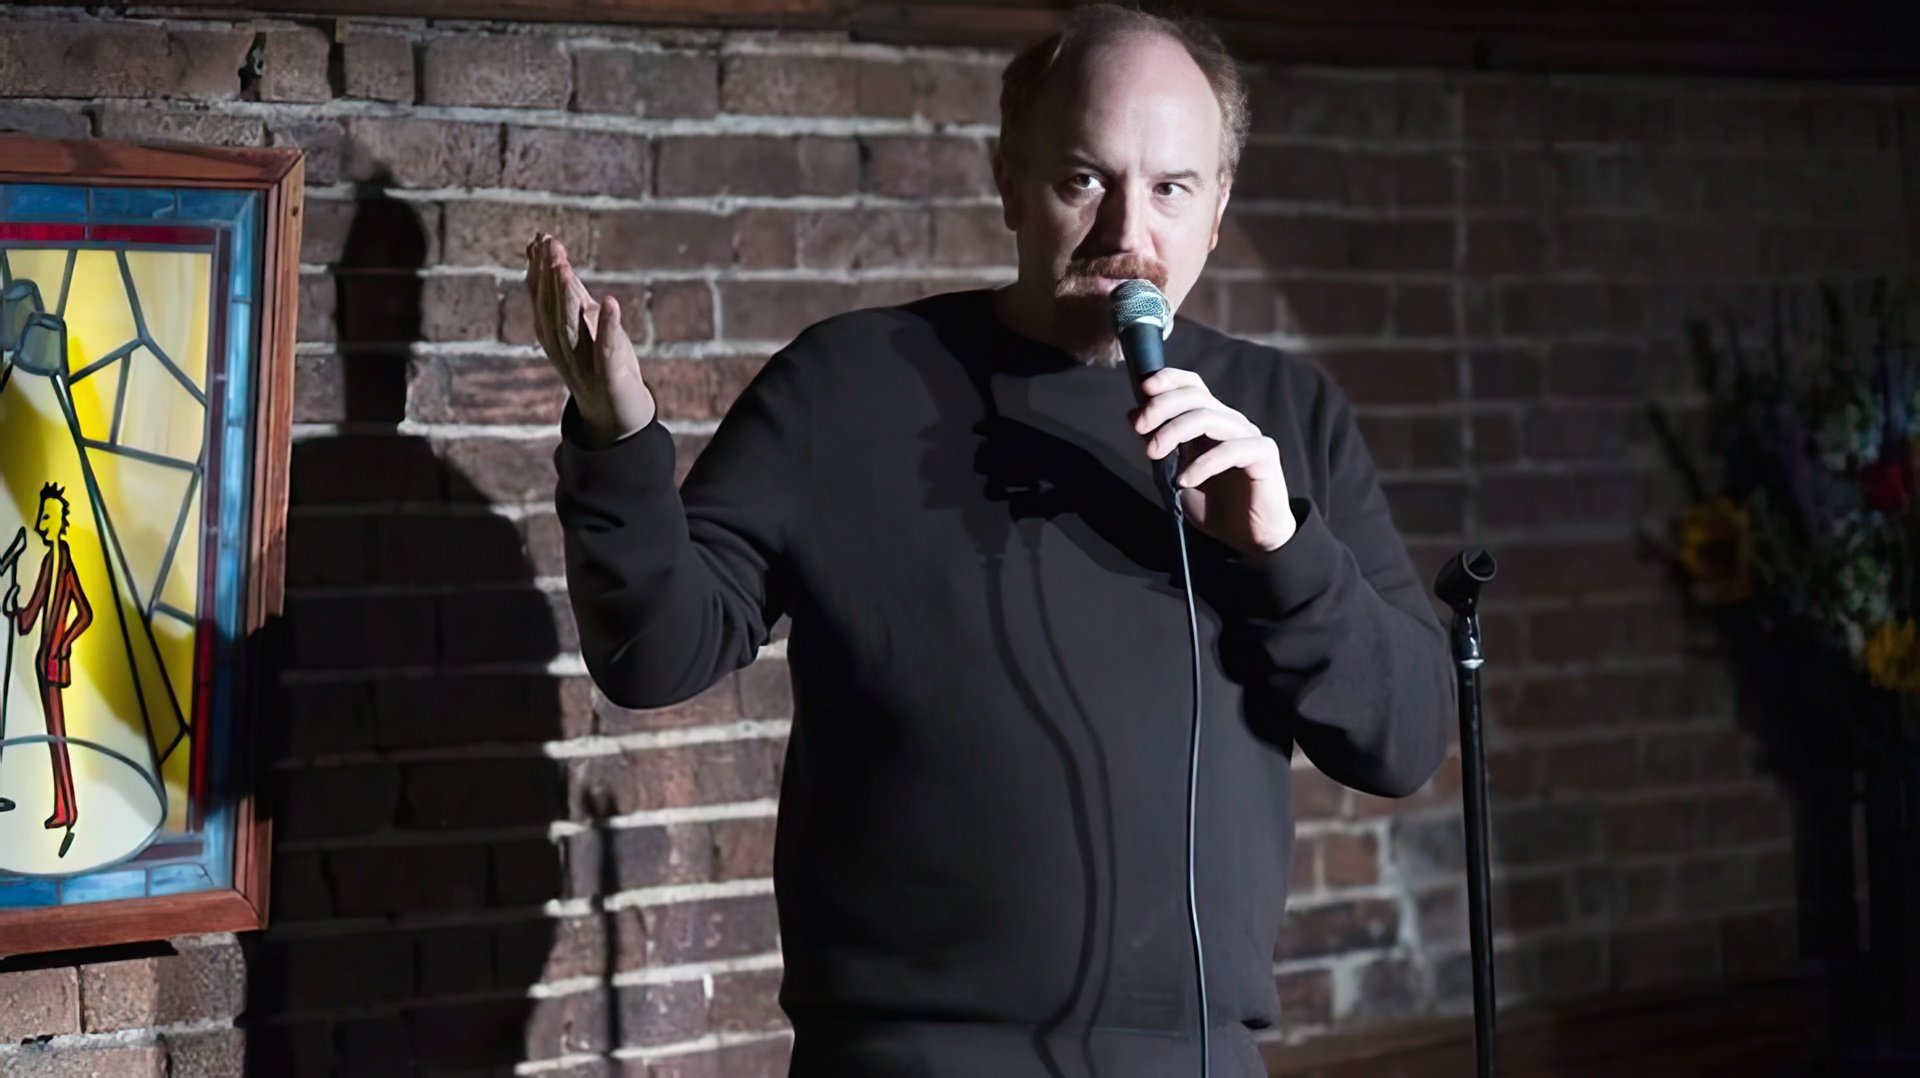 Louis C.K. chose the image of a lazy balding middle-aged overweight man